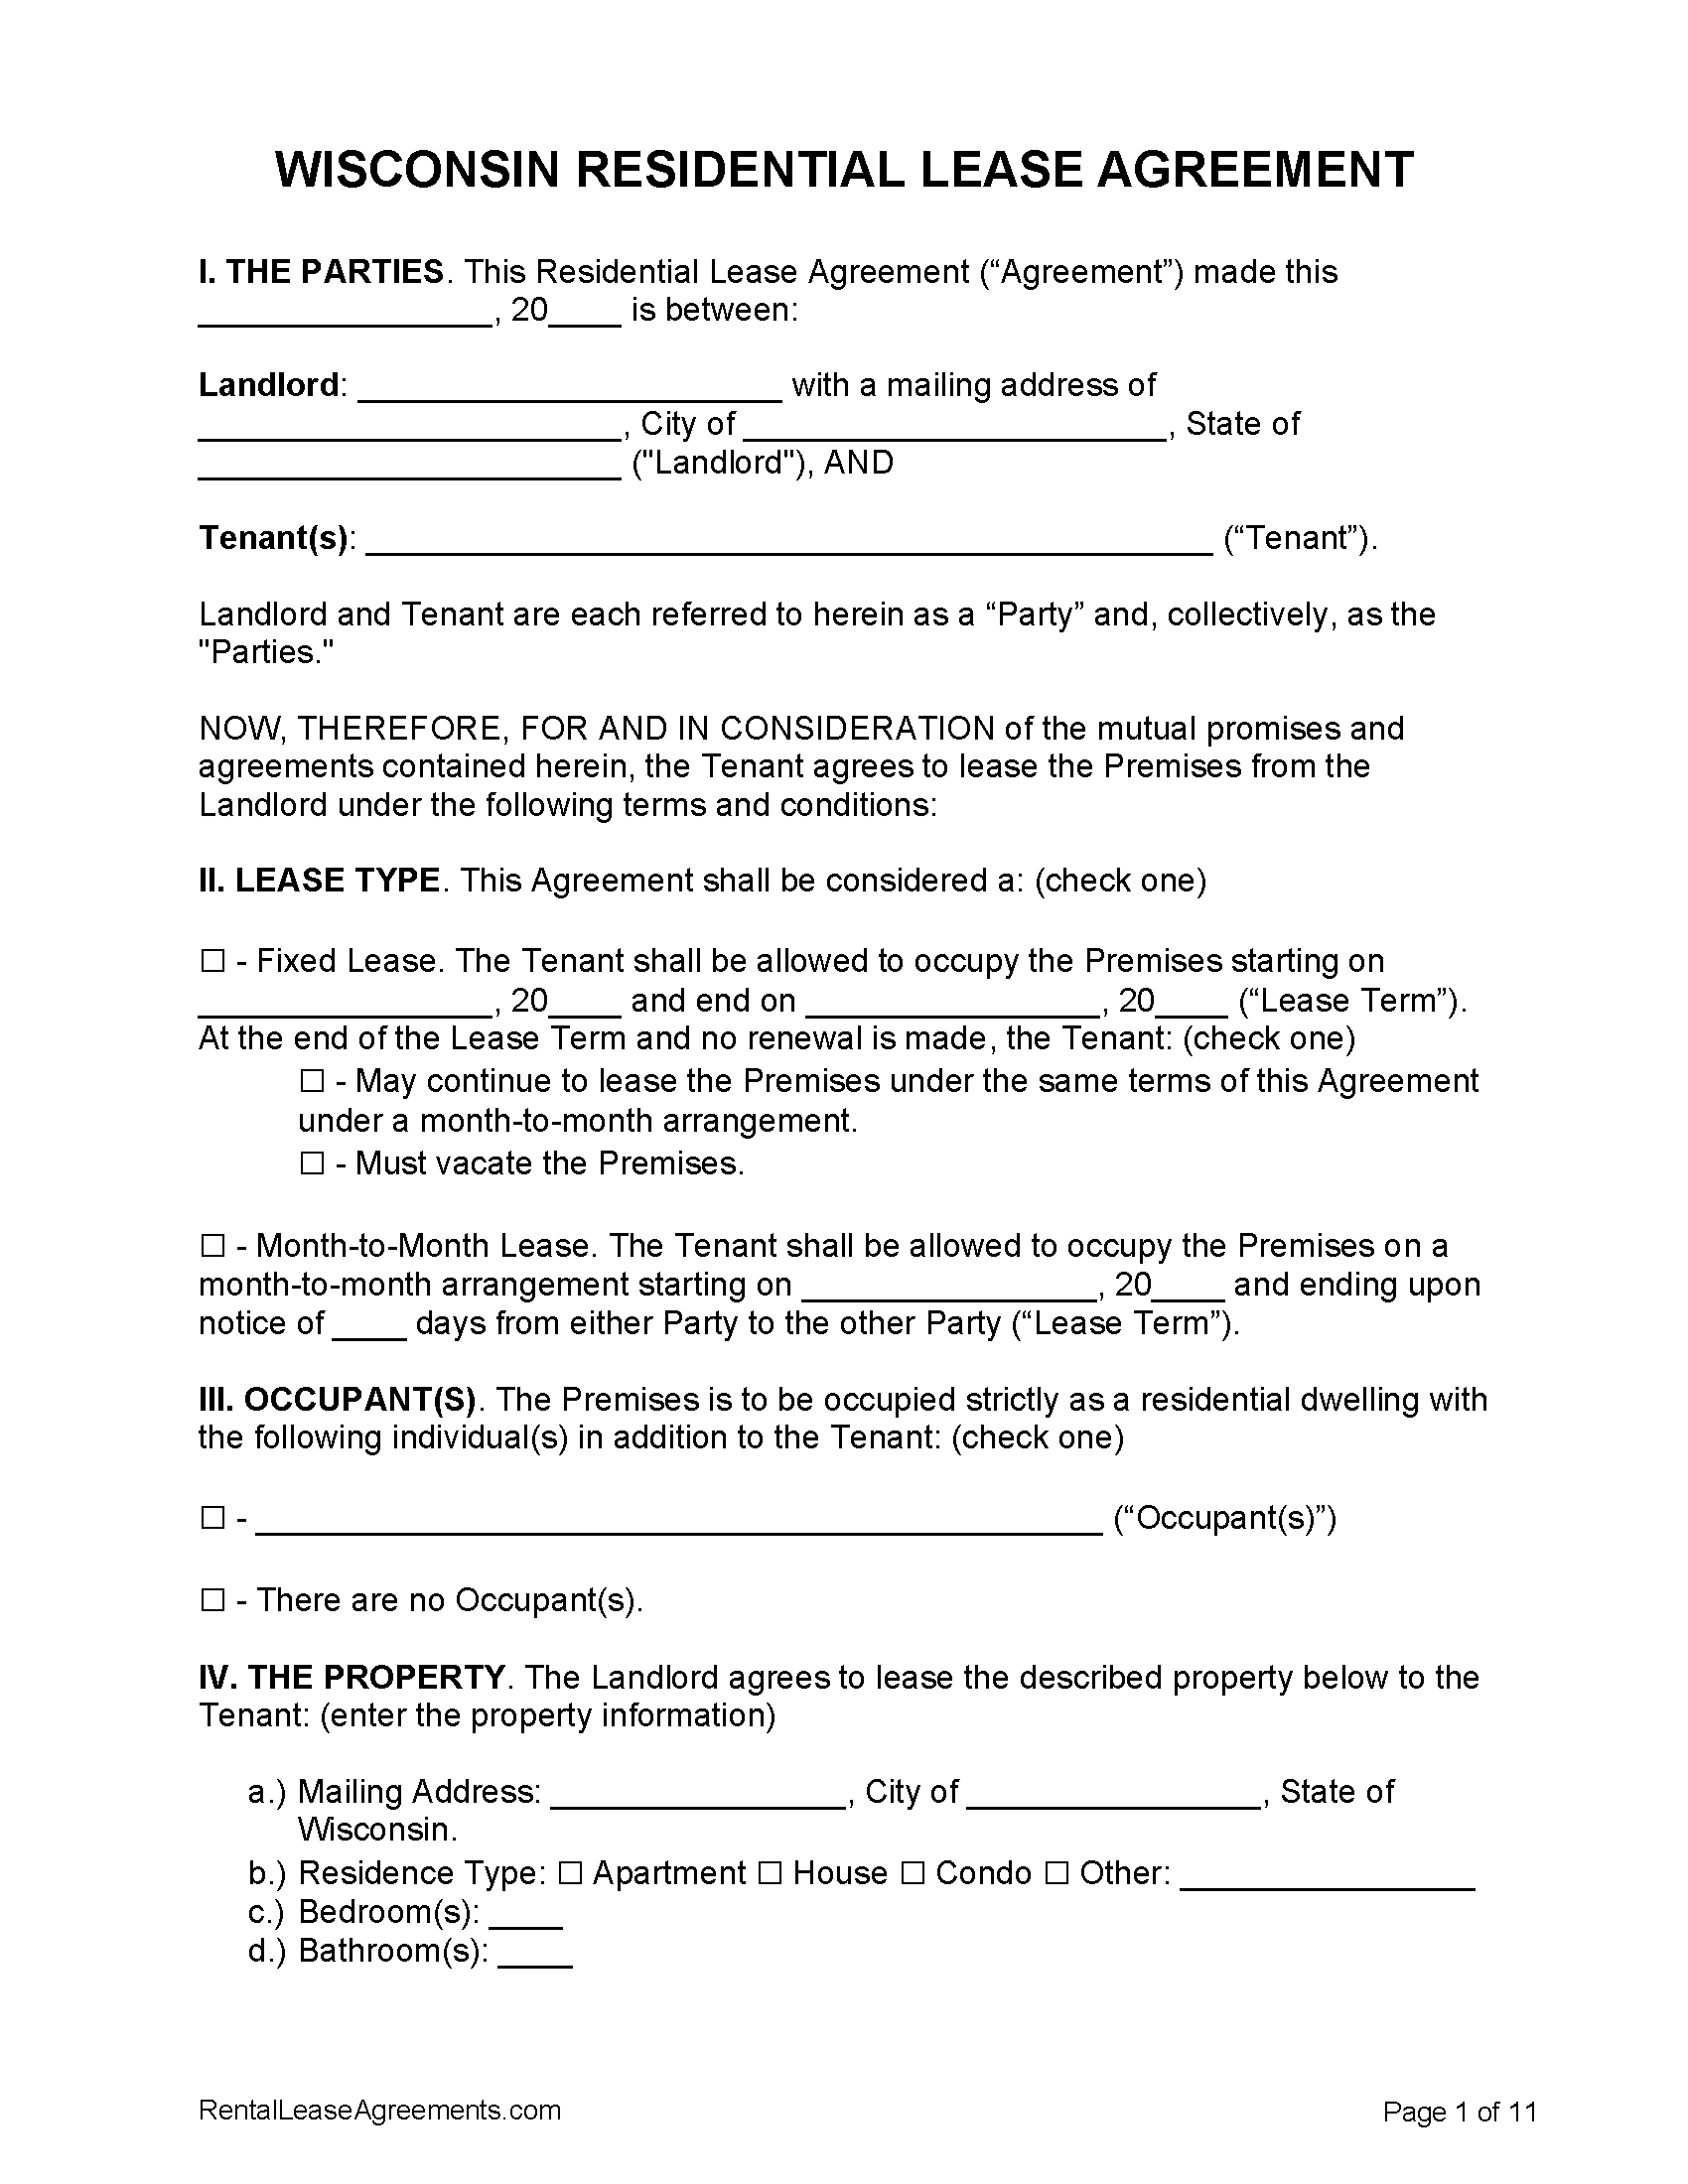 wisconsin-residential-lease-agreement-pdf-free-printable-rental-lease-agreement-templates